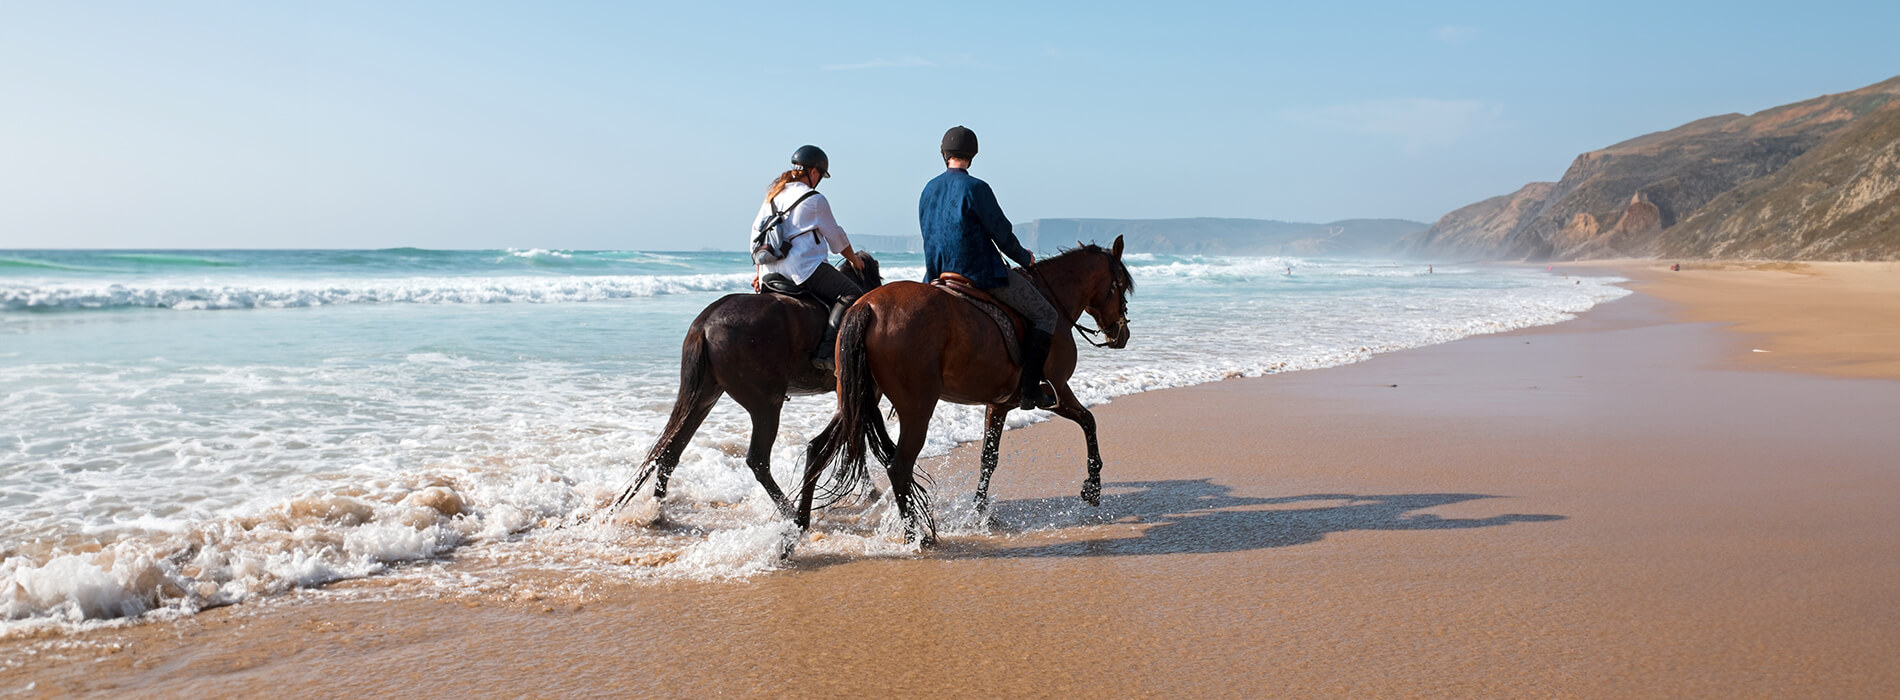 Beach horse back riding experience in los Cabos header